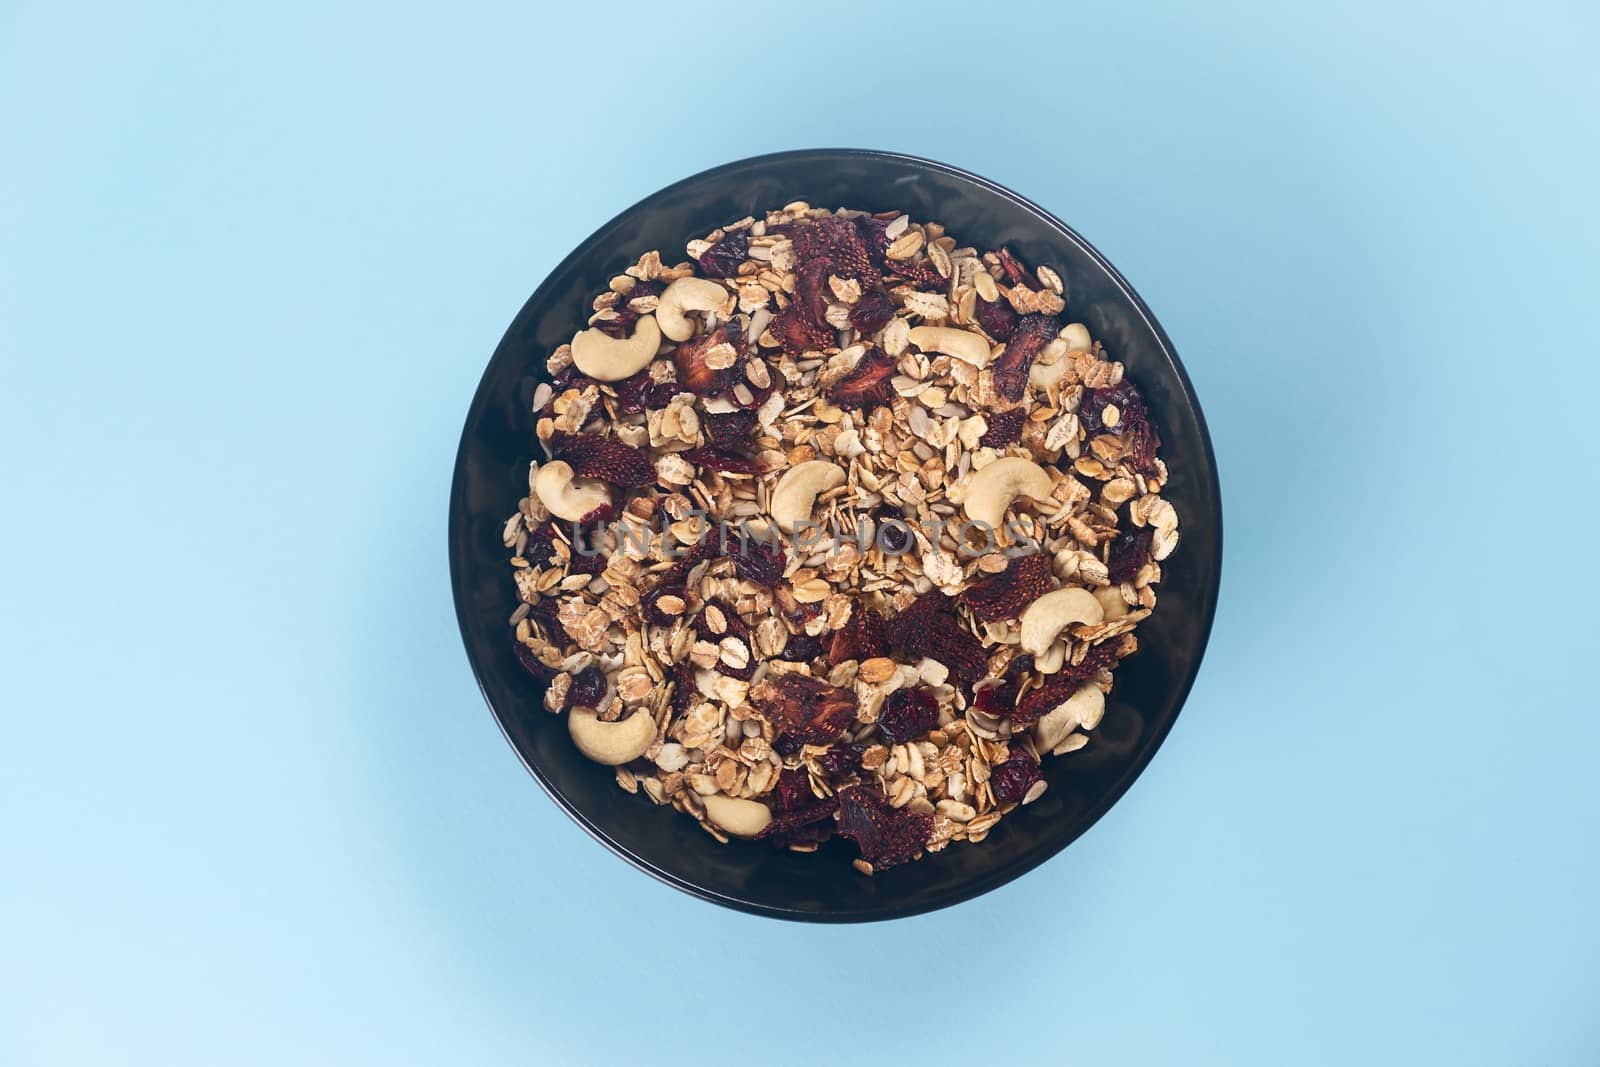 A fresh granola with dried and candied nuts and fruits in black bowl on blue bakground. Concept of nutrient and healty breakfast or meal